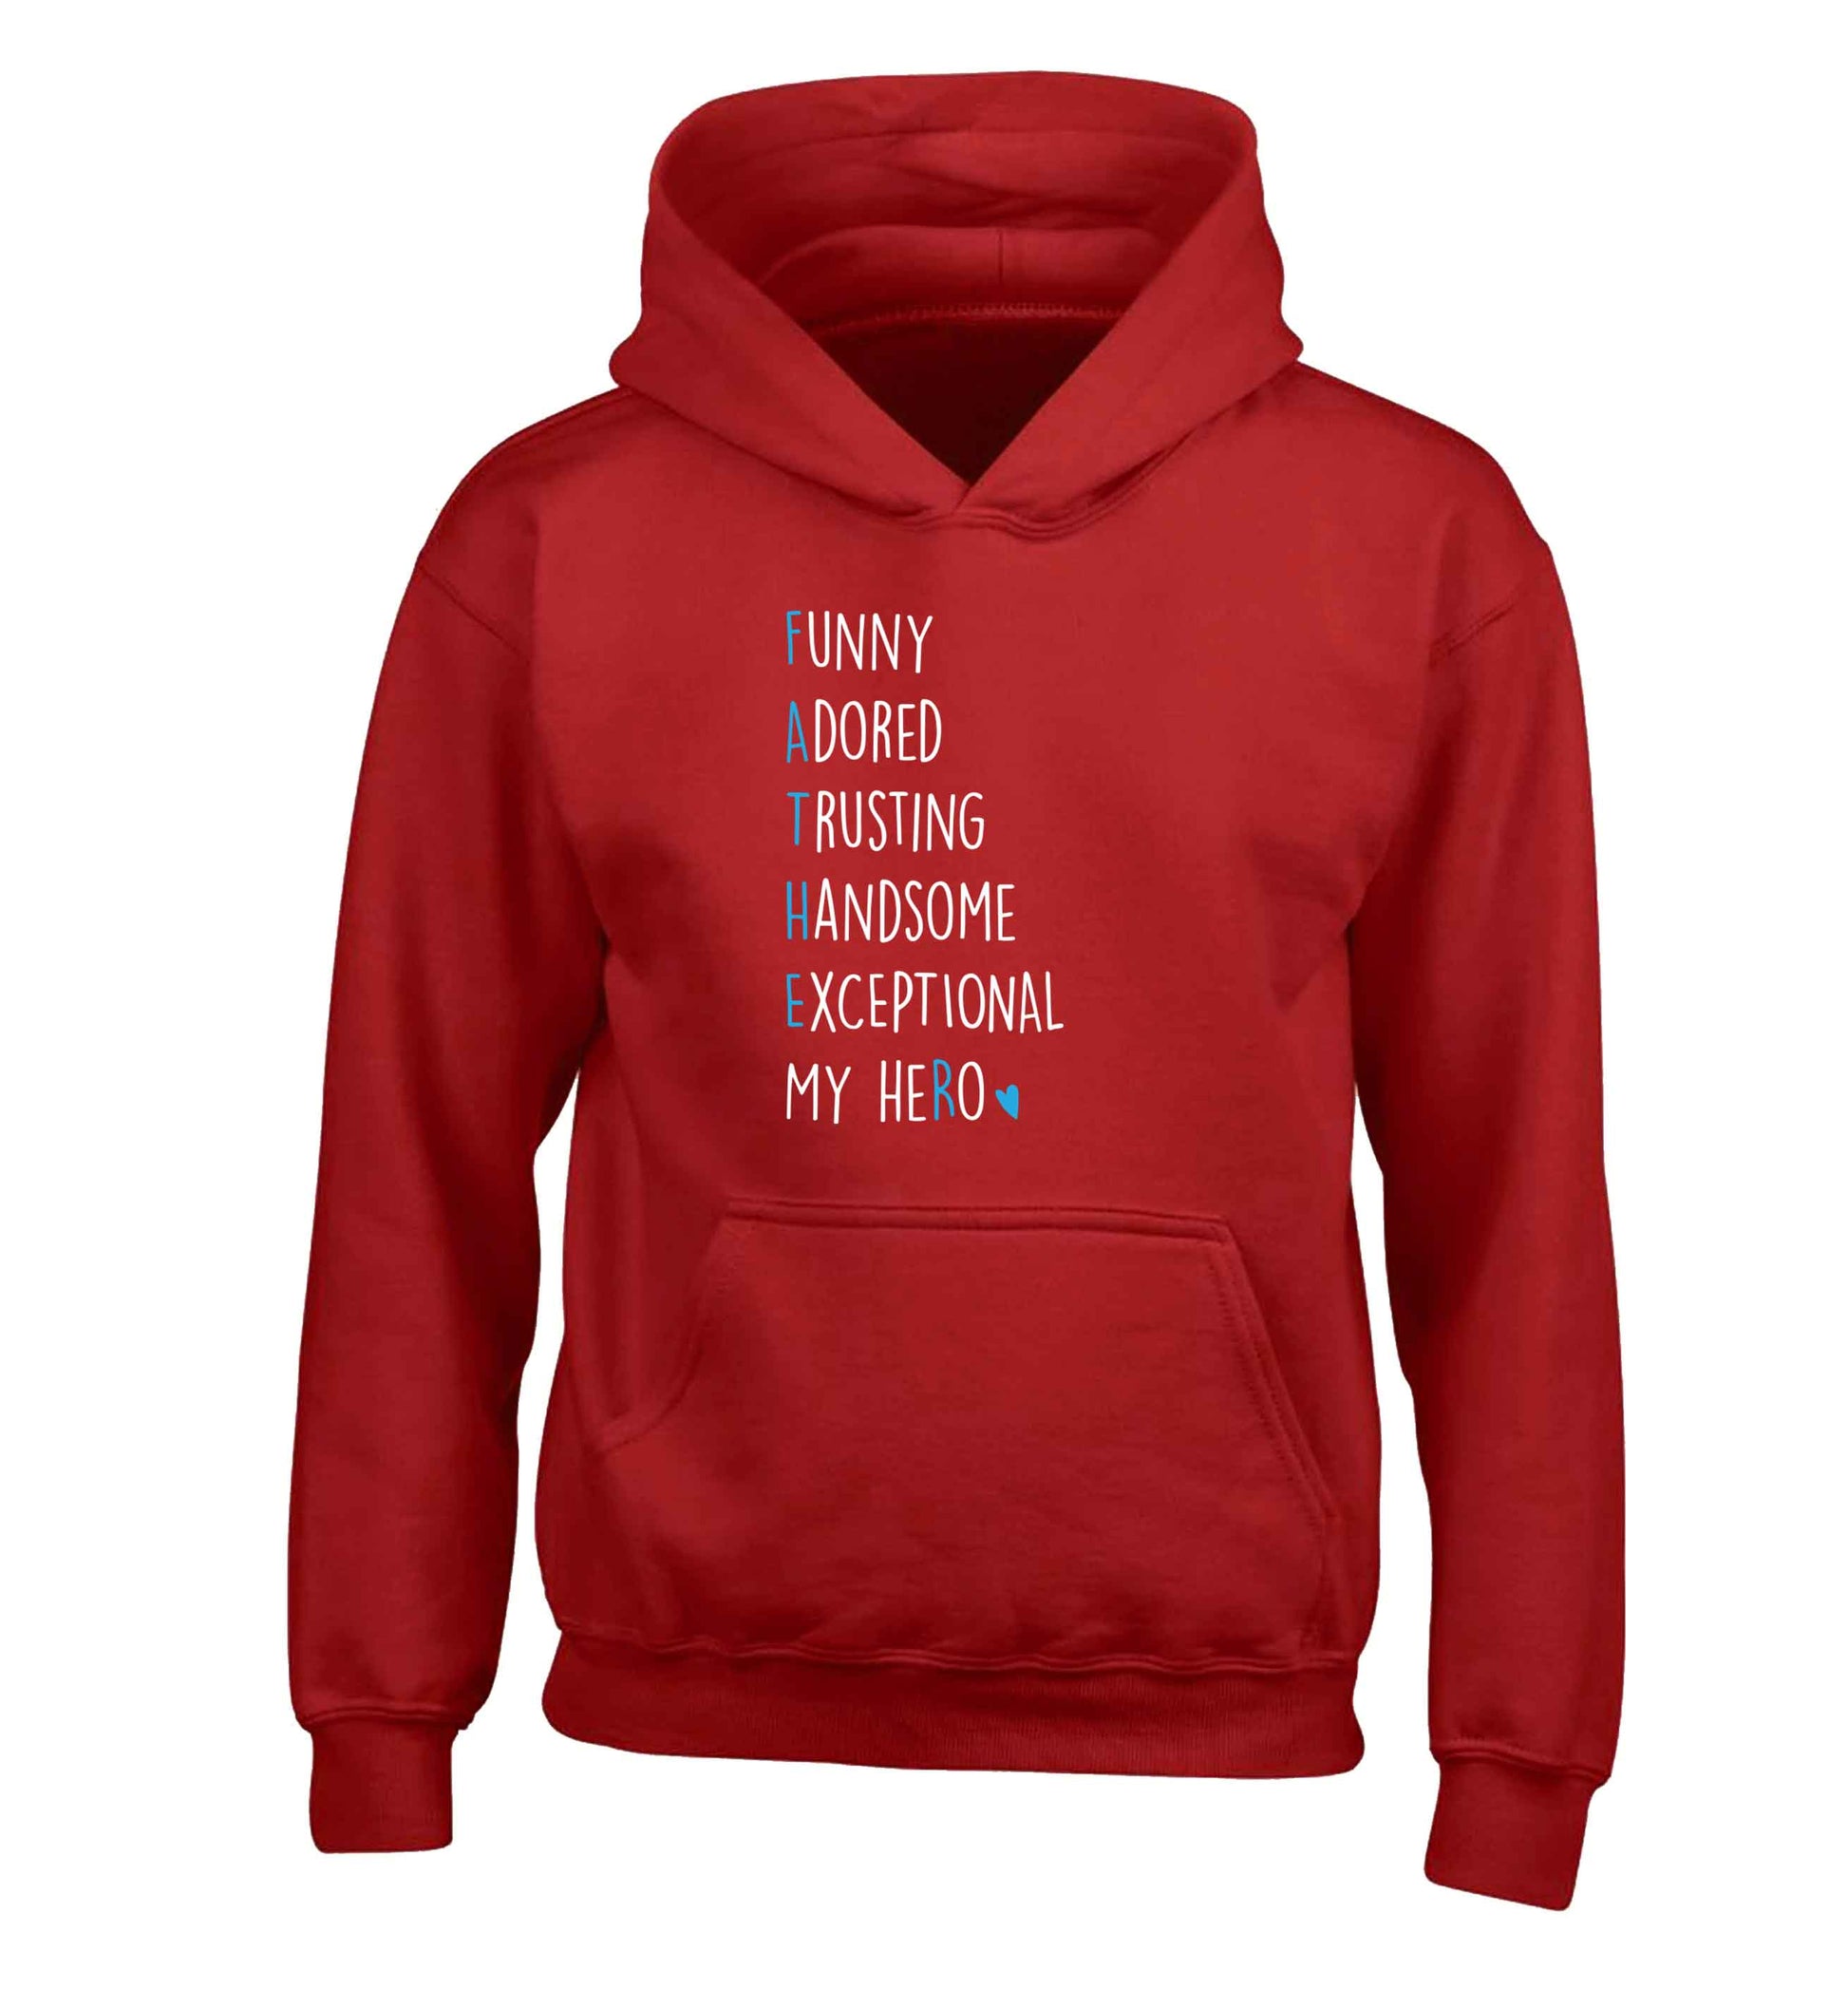 Father, funny adored trusting handsome exceptional my hero children's red hoodie 12-13 Years